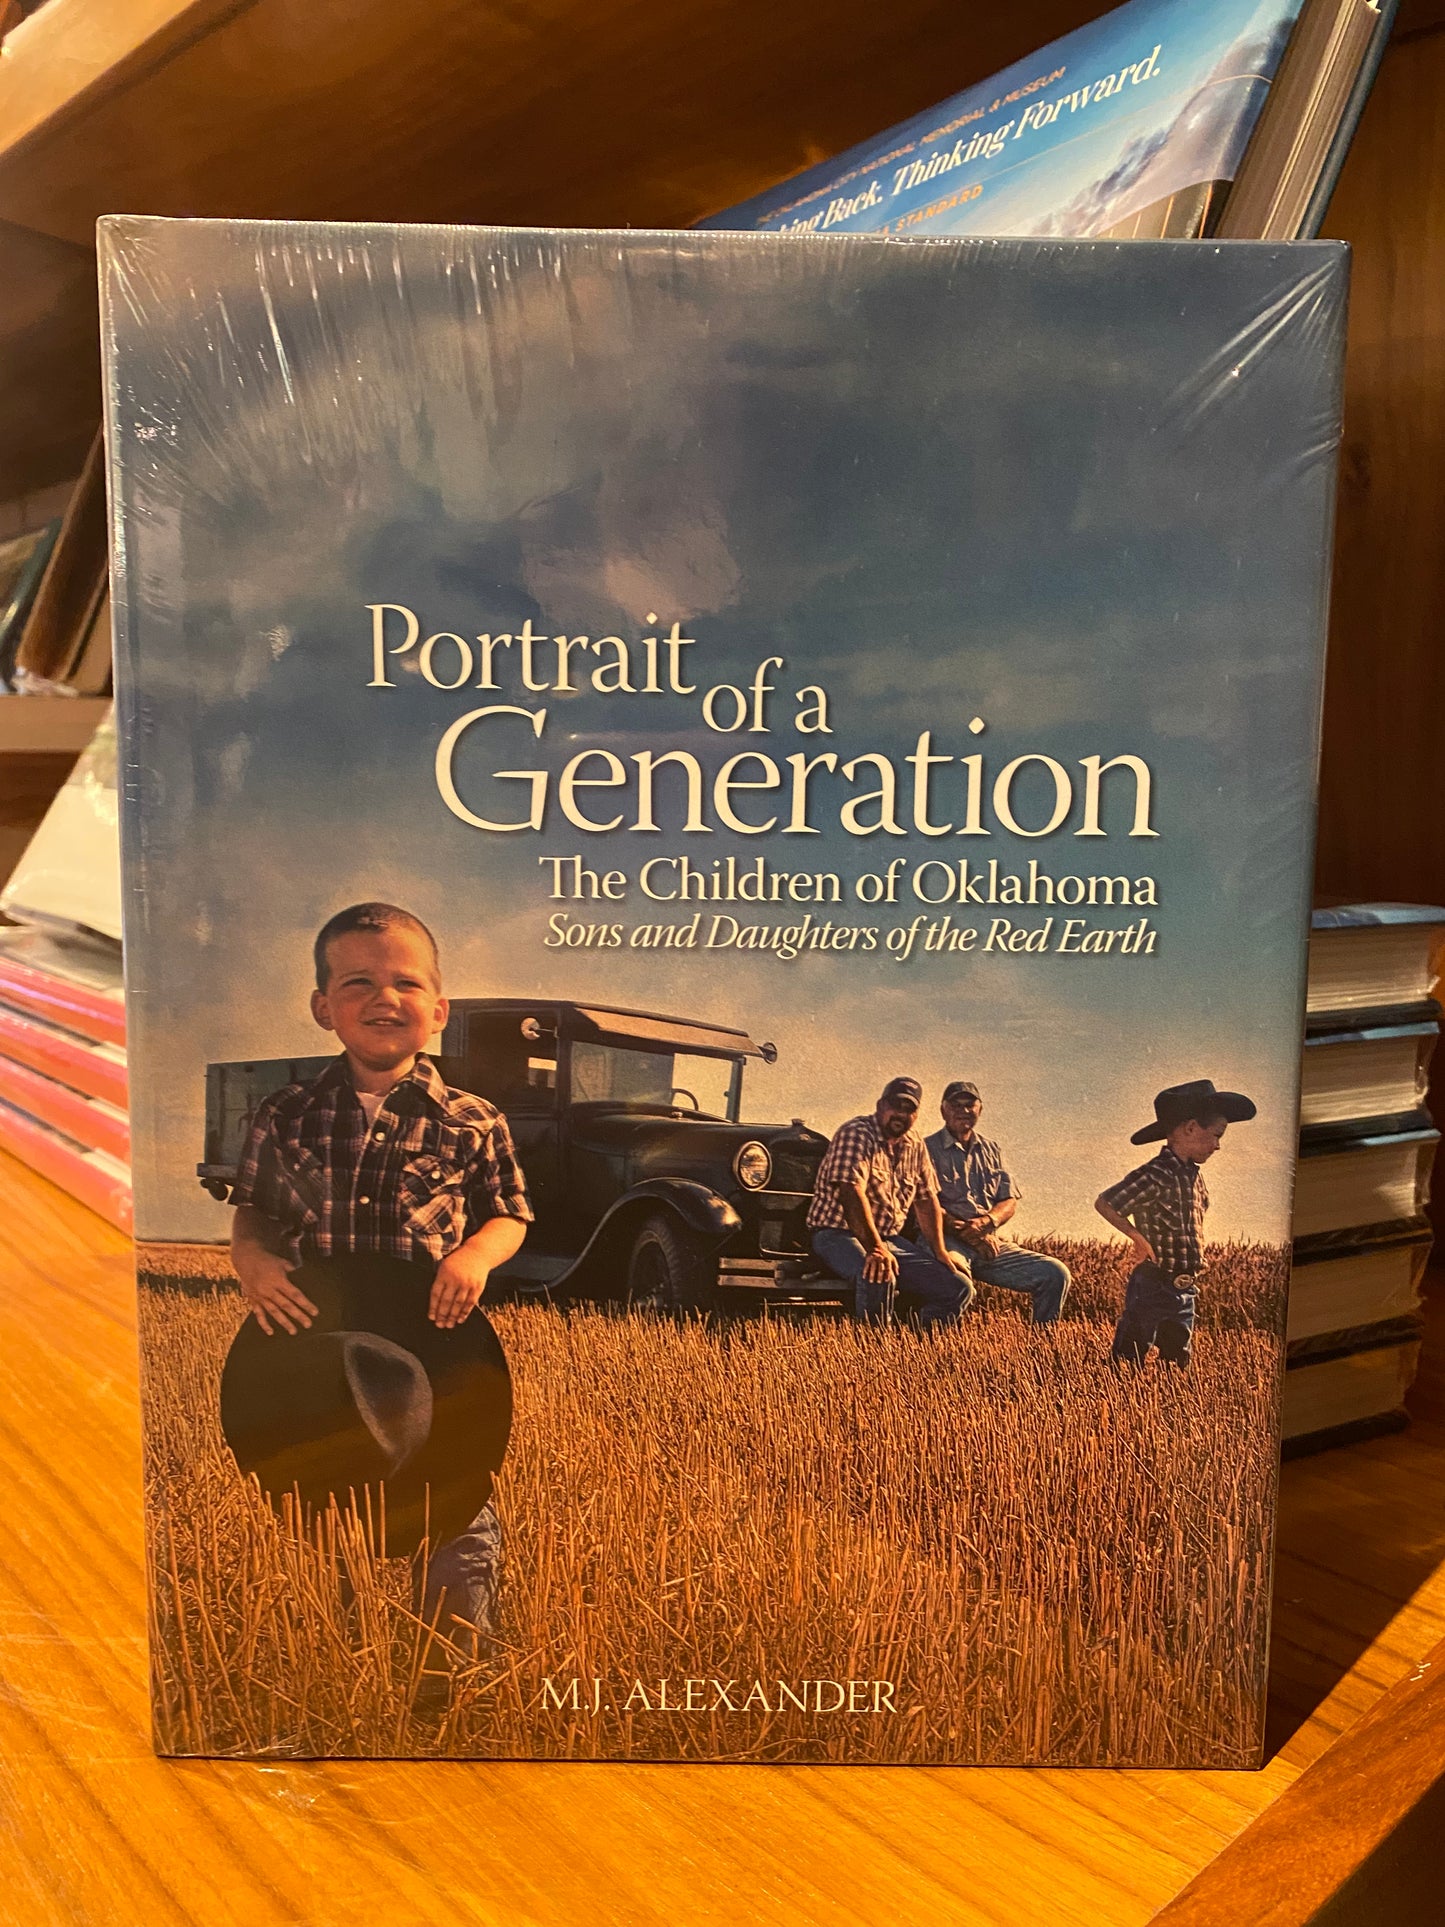 Portrait of a Generation: The Children of Oklahoma